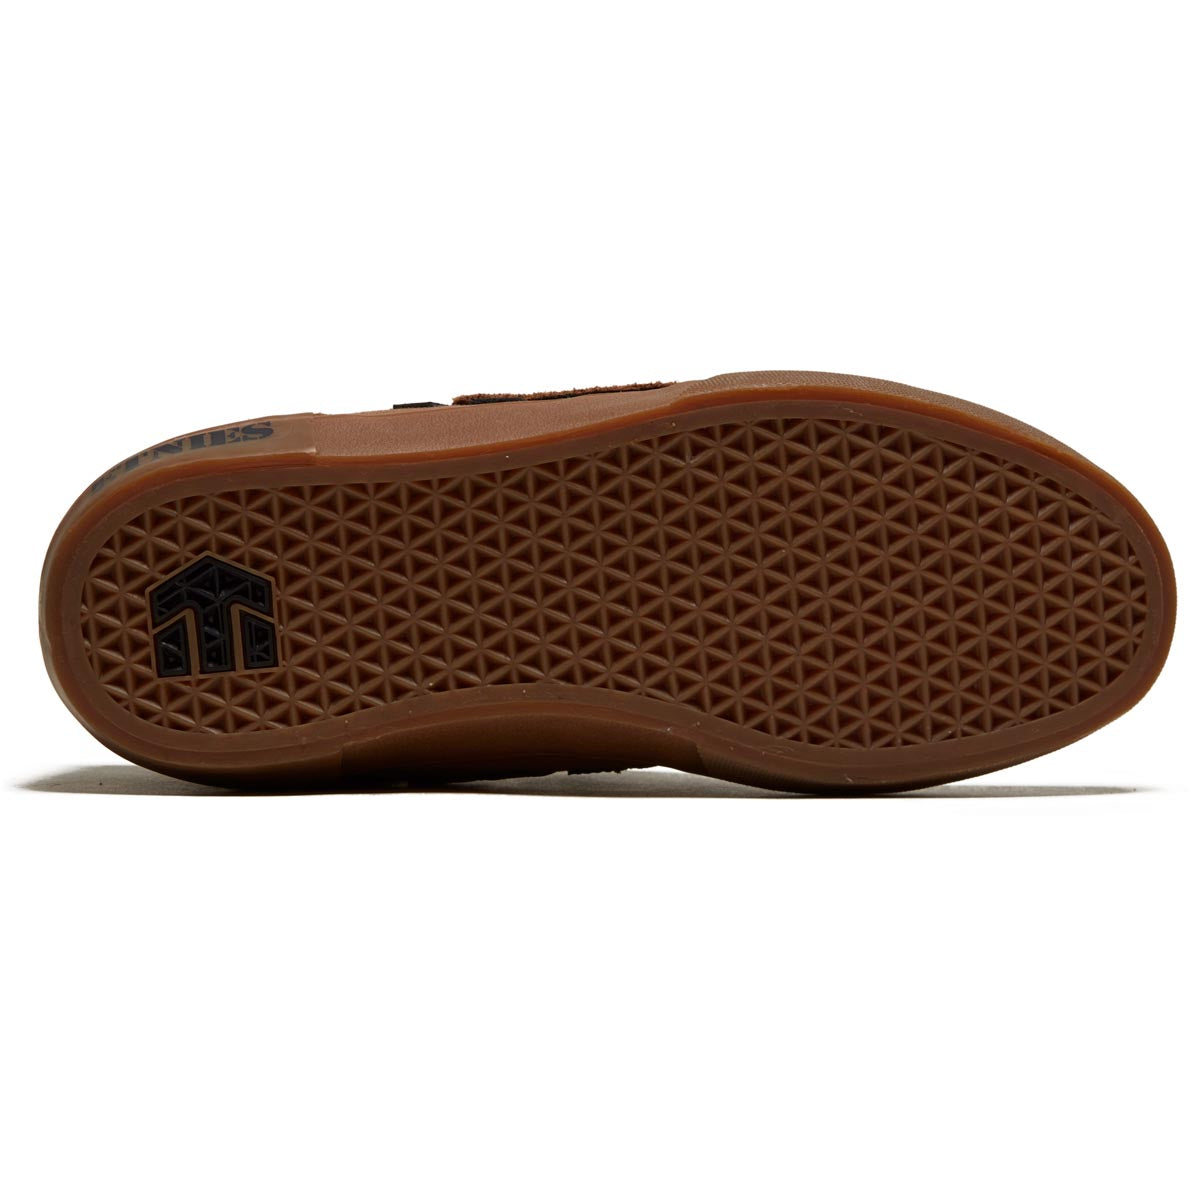 Etnies Windrow Vulc Mid Shoes - Brown/Gum image 4